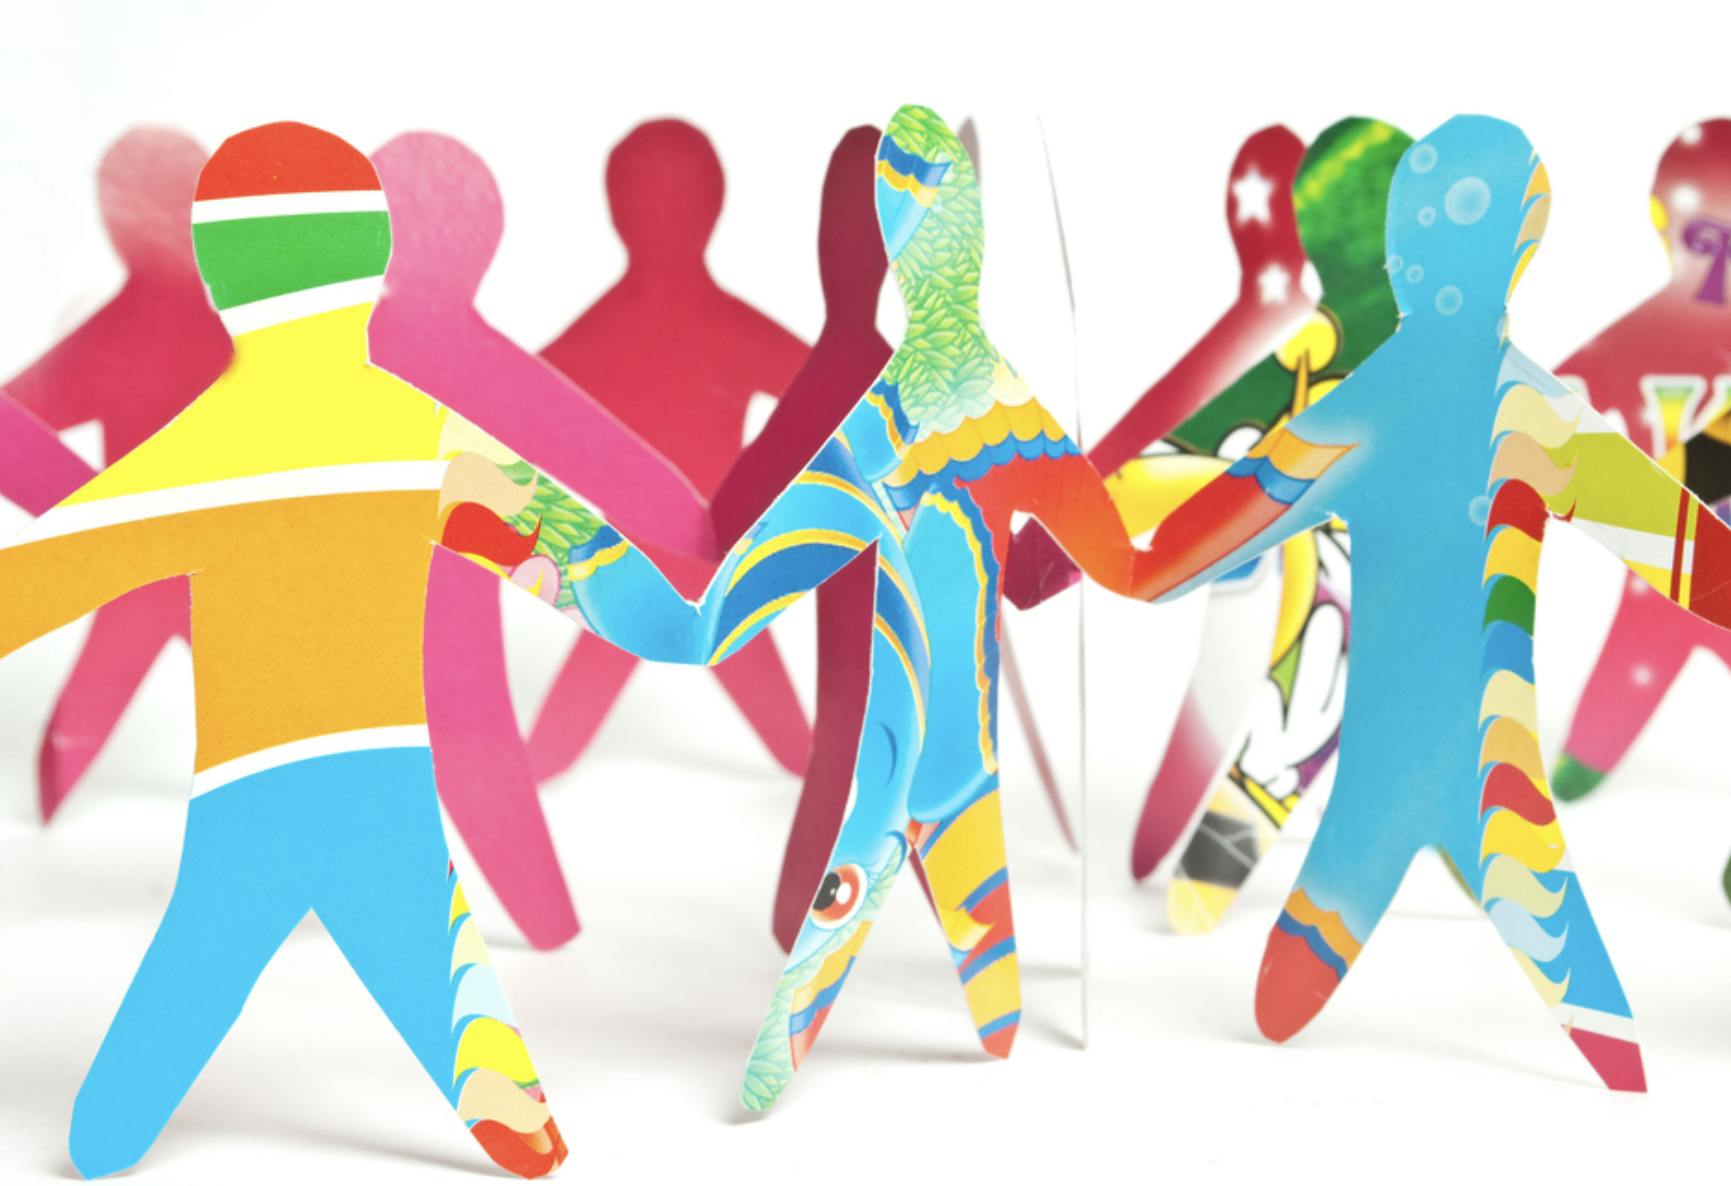 Image of people shapes cut out of colored paper holding hands. Related to: mitigating discrimination, equity, AI bias, algorithm bias, hiring process, AI in resume review, ai bias recruiting, ai bias examples, ai bias in recruiting, ai recruiting tool bias.